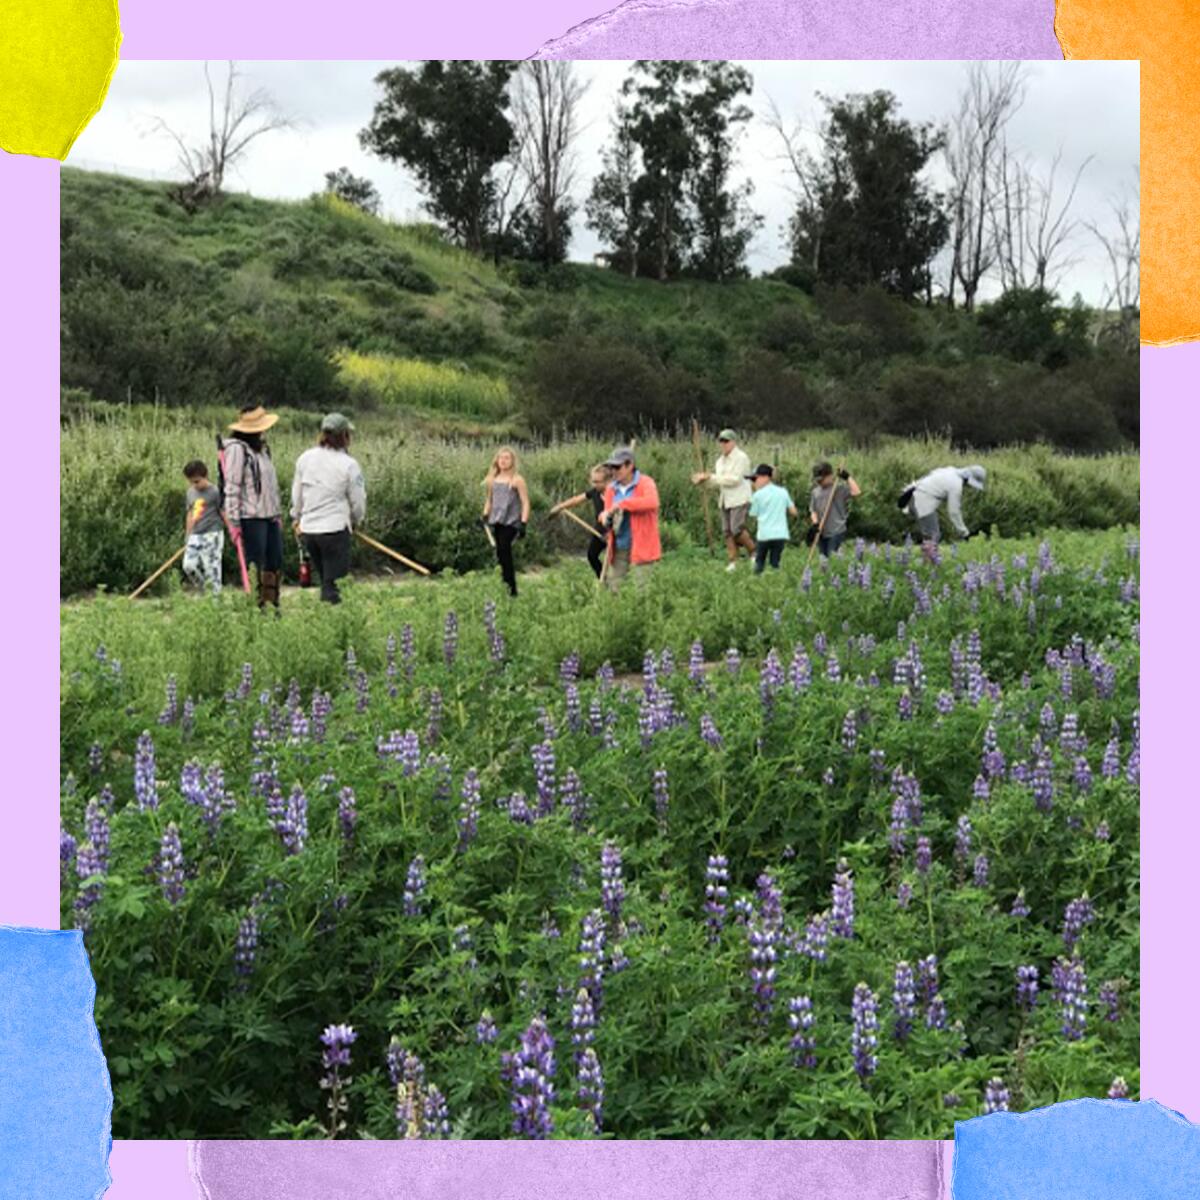 People with hoes stand among purple flowers in a field.